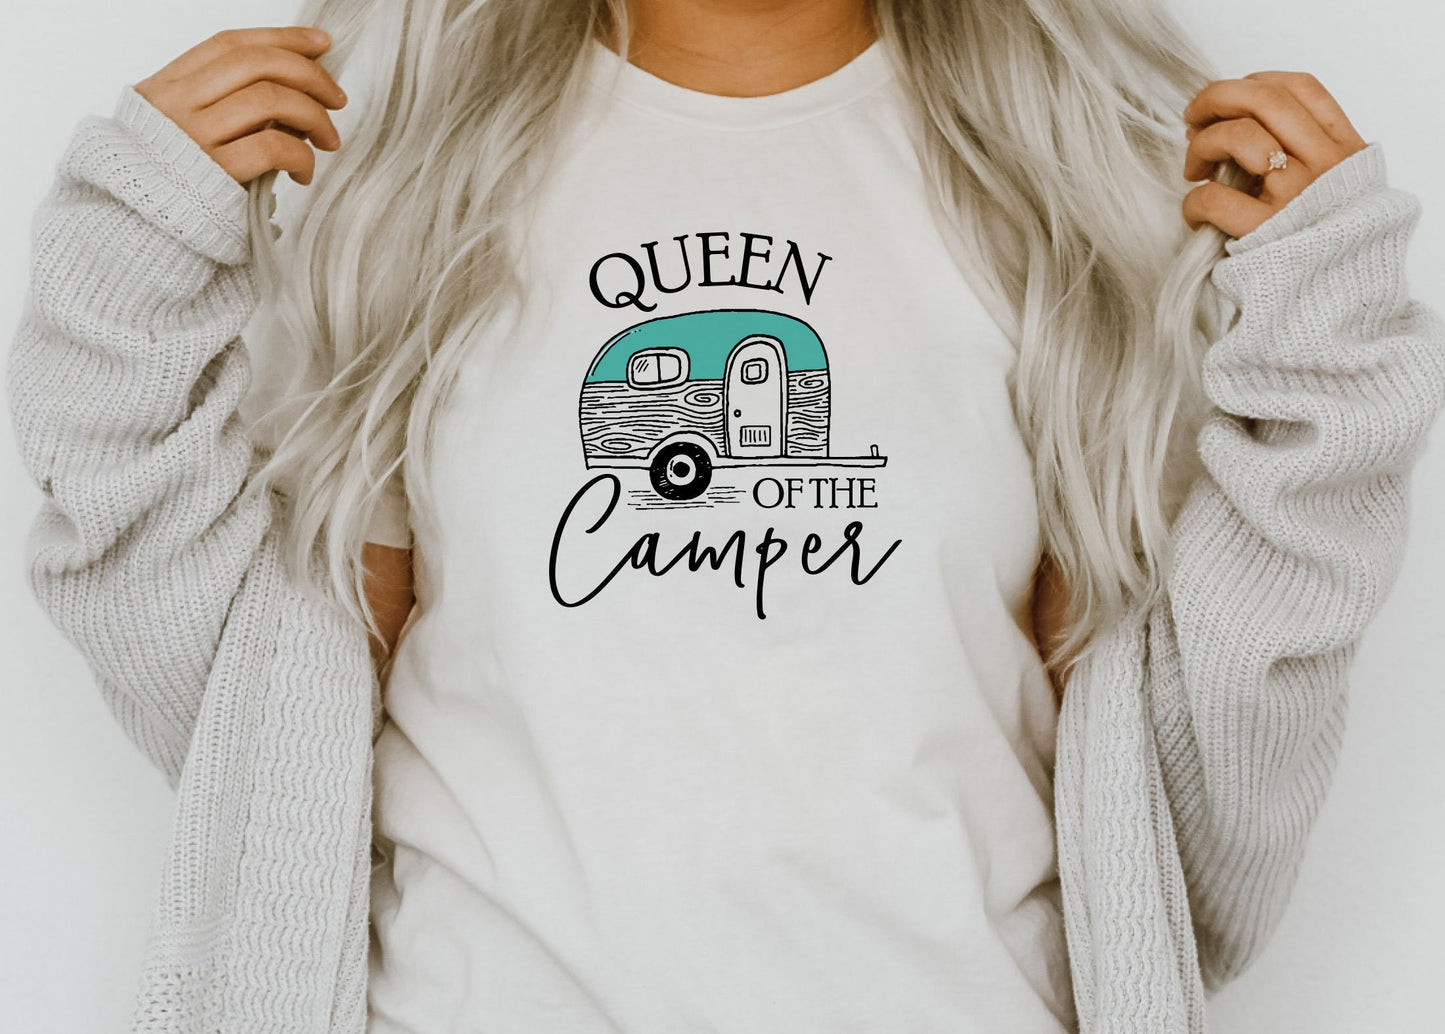 Queen of the Camper - Camp Shirt - Women Shirts with Sayings